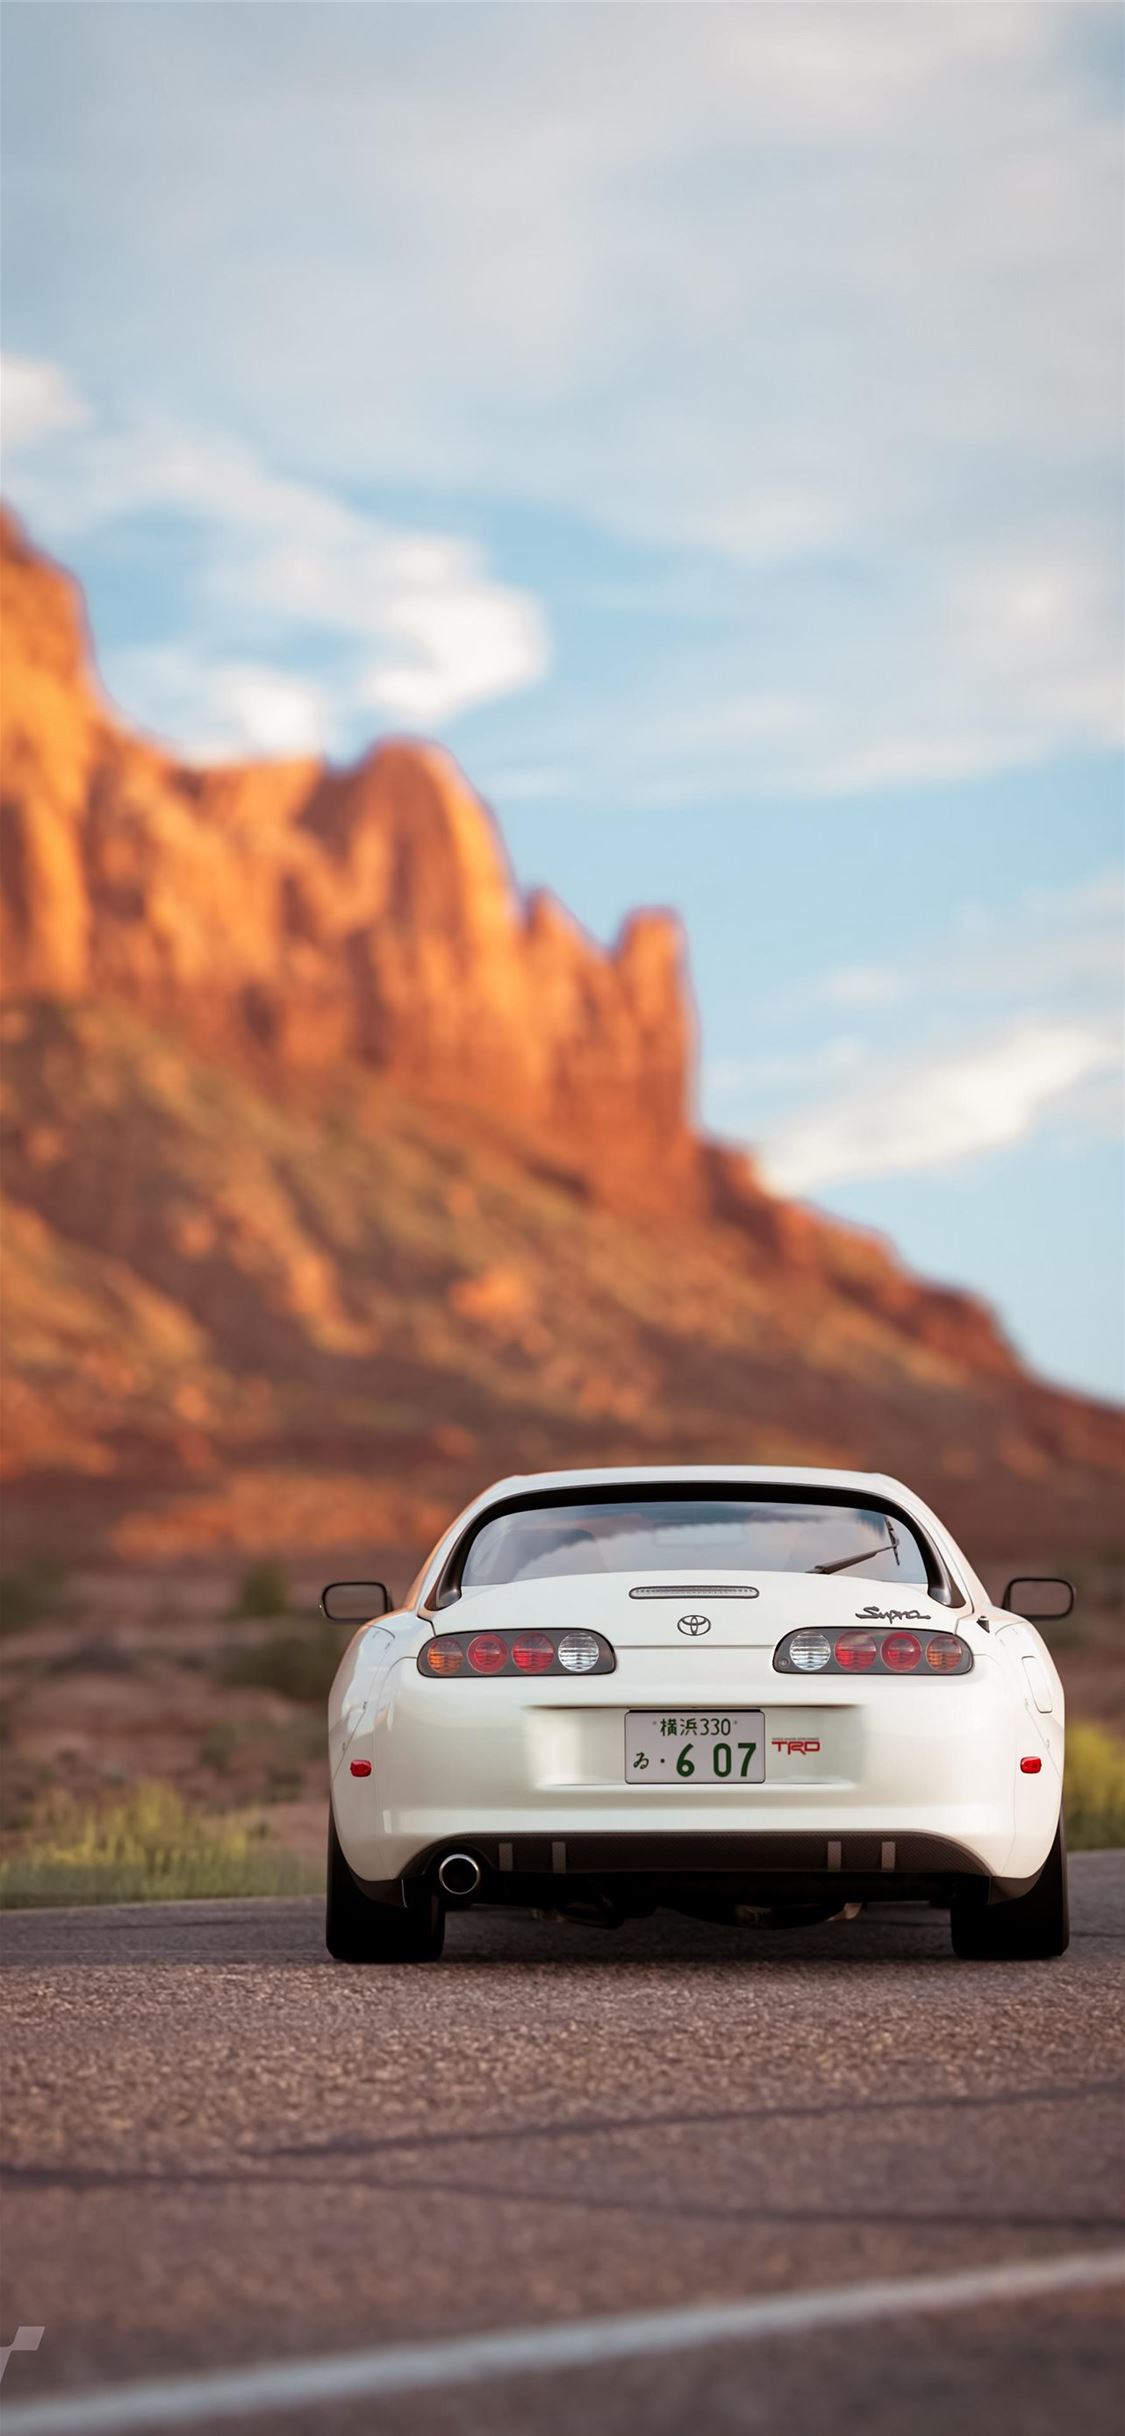 Download Supra wallpaper by PedroDavi27  eadc  Free on ZEDGE now Browse  millions of popular forza Wallpapers an  Toyota supra mk4 Toyota supra  Best jdm cars